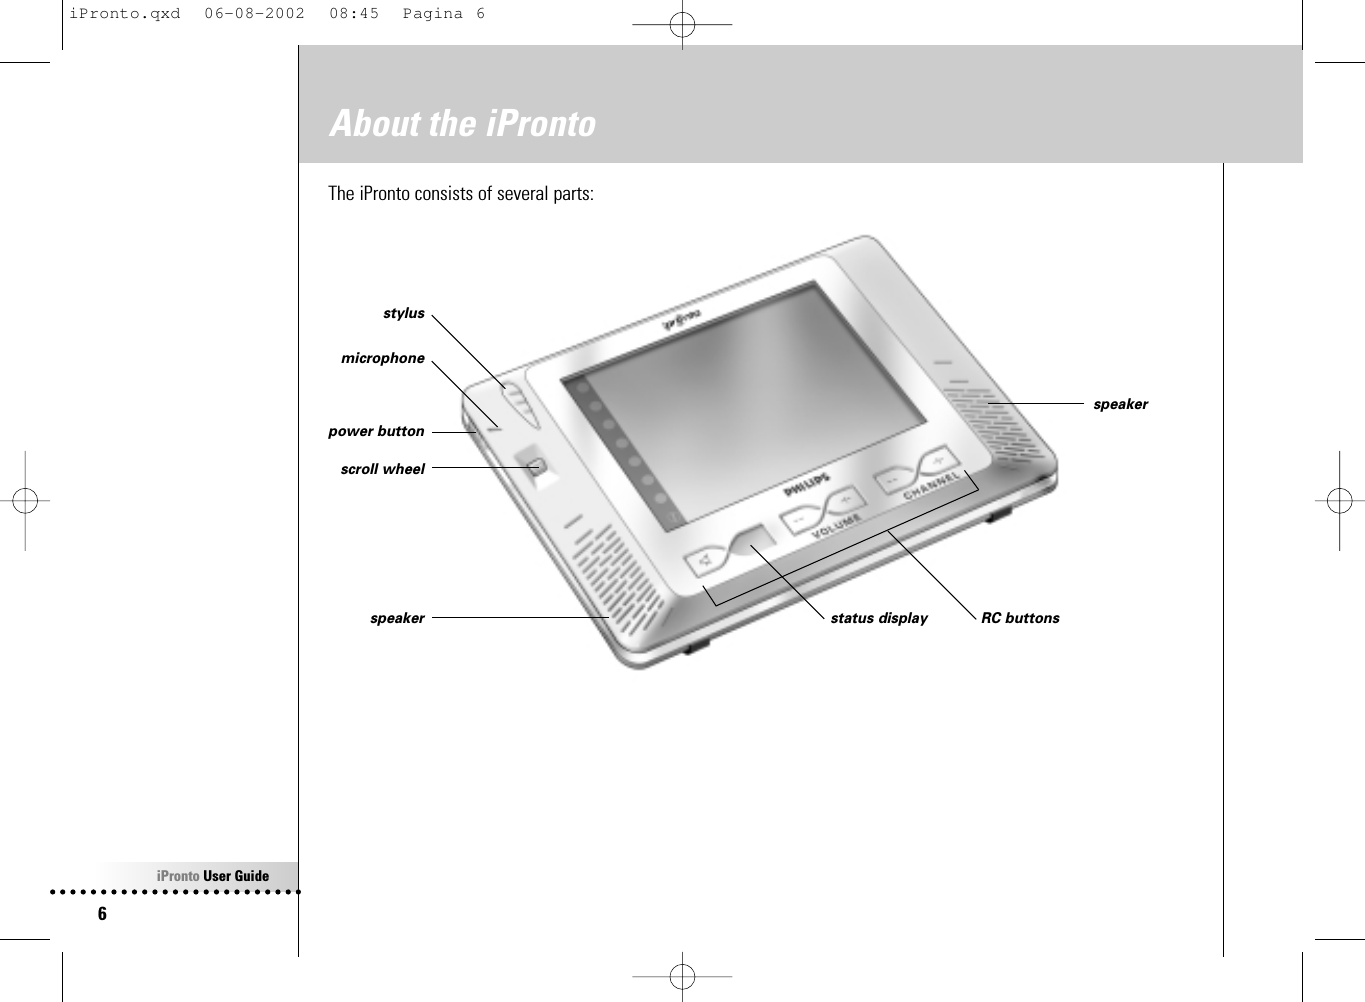 iPronto User Guide6About the iProntoThe iPronto consists of several parts:microphonestyluspower buttonspeakerscroll wheelspeakerRC buttonsstatus displayiPronto.qxd  06-08-2002  08:45  Pagina 6